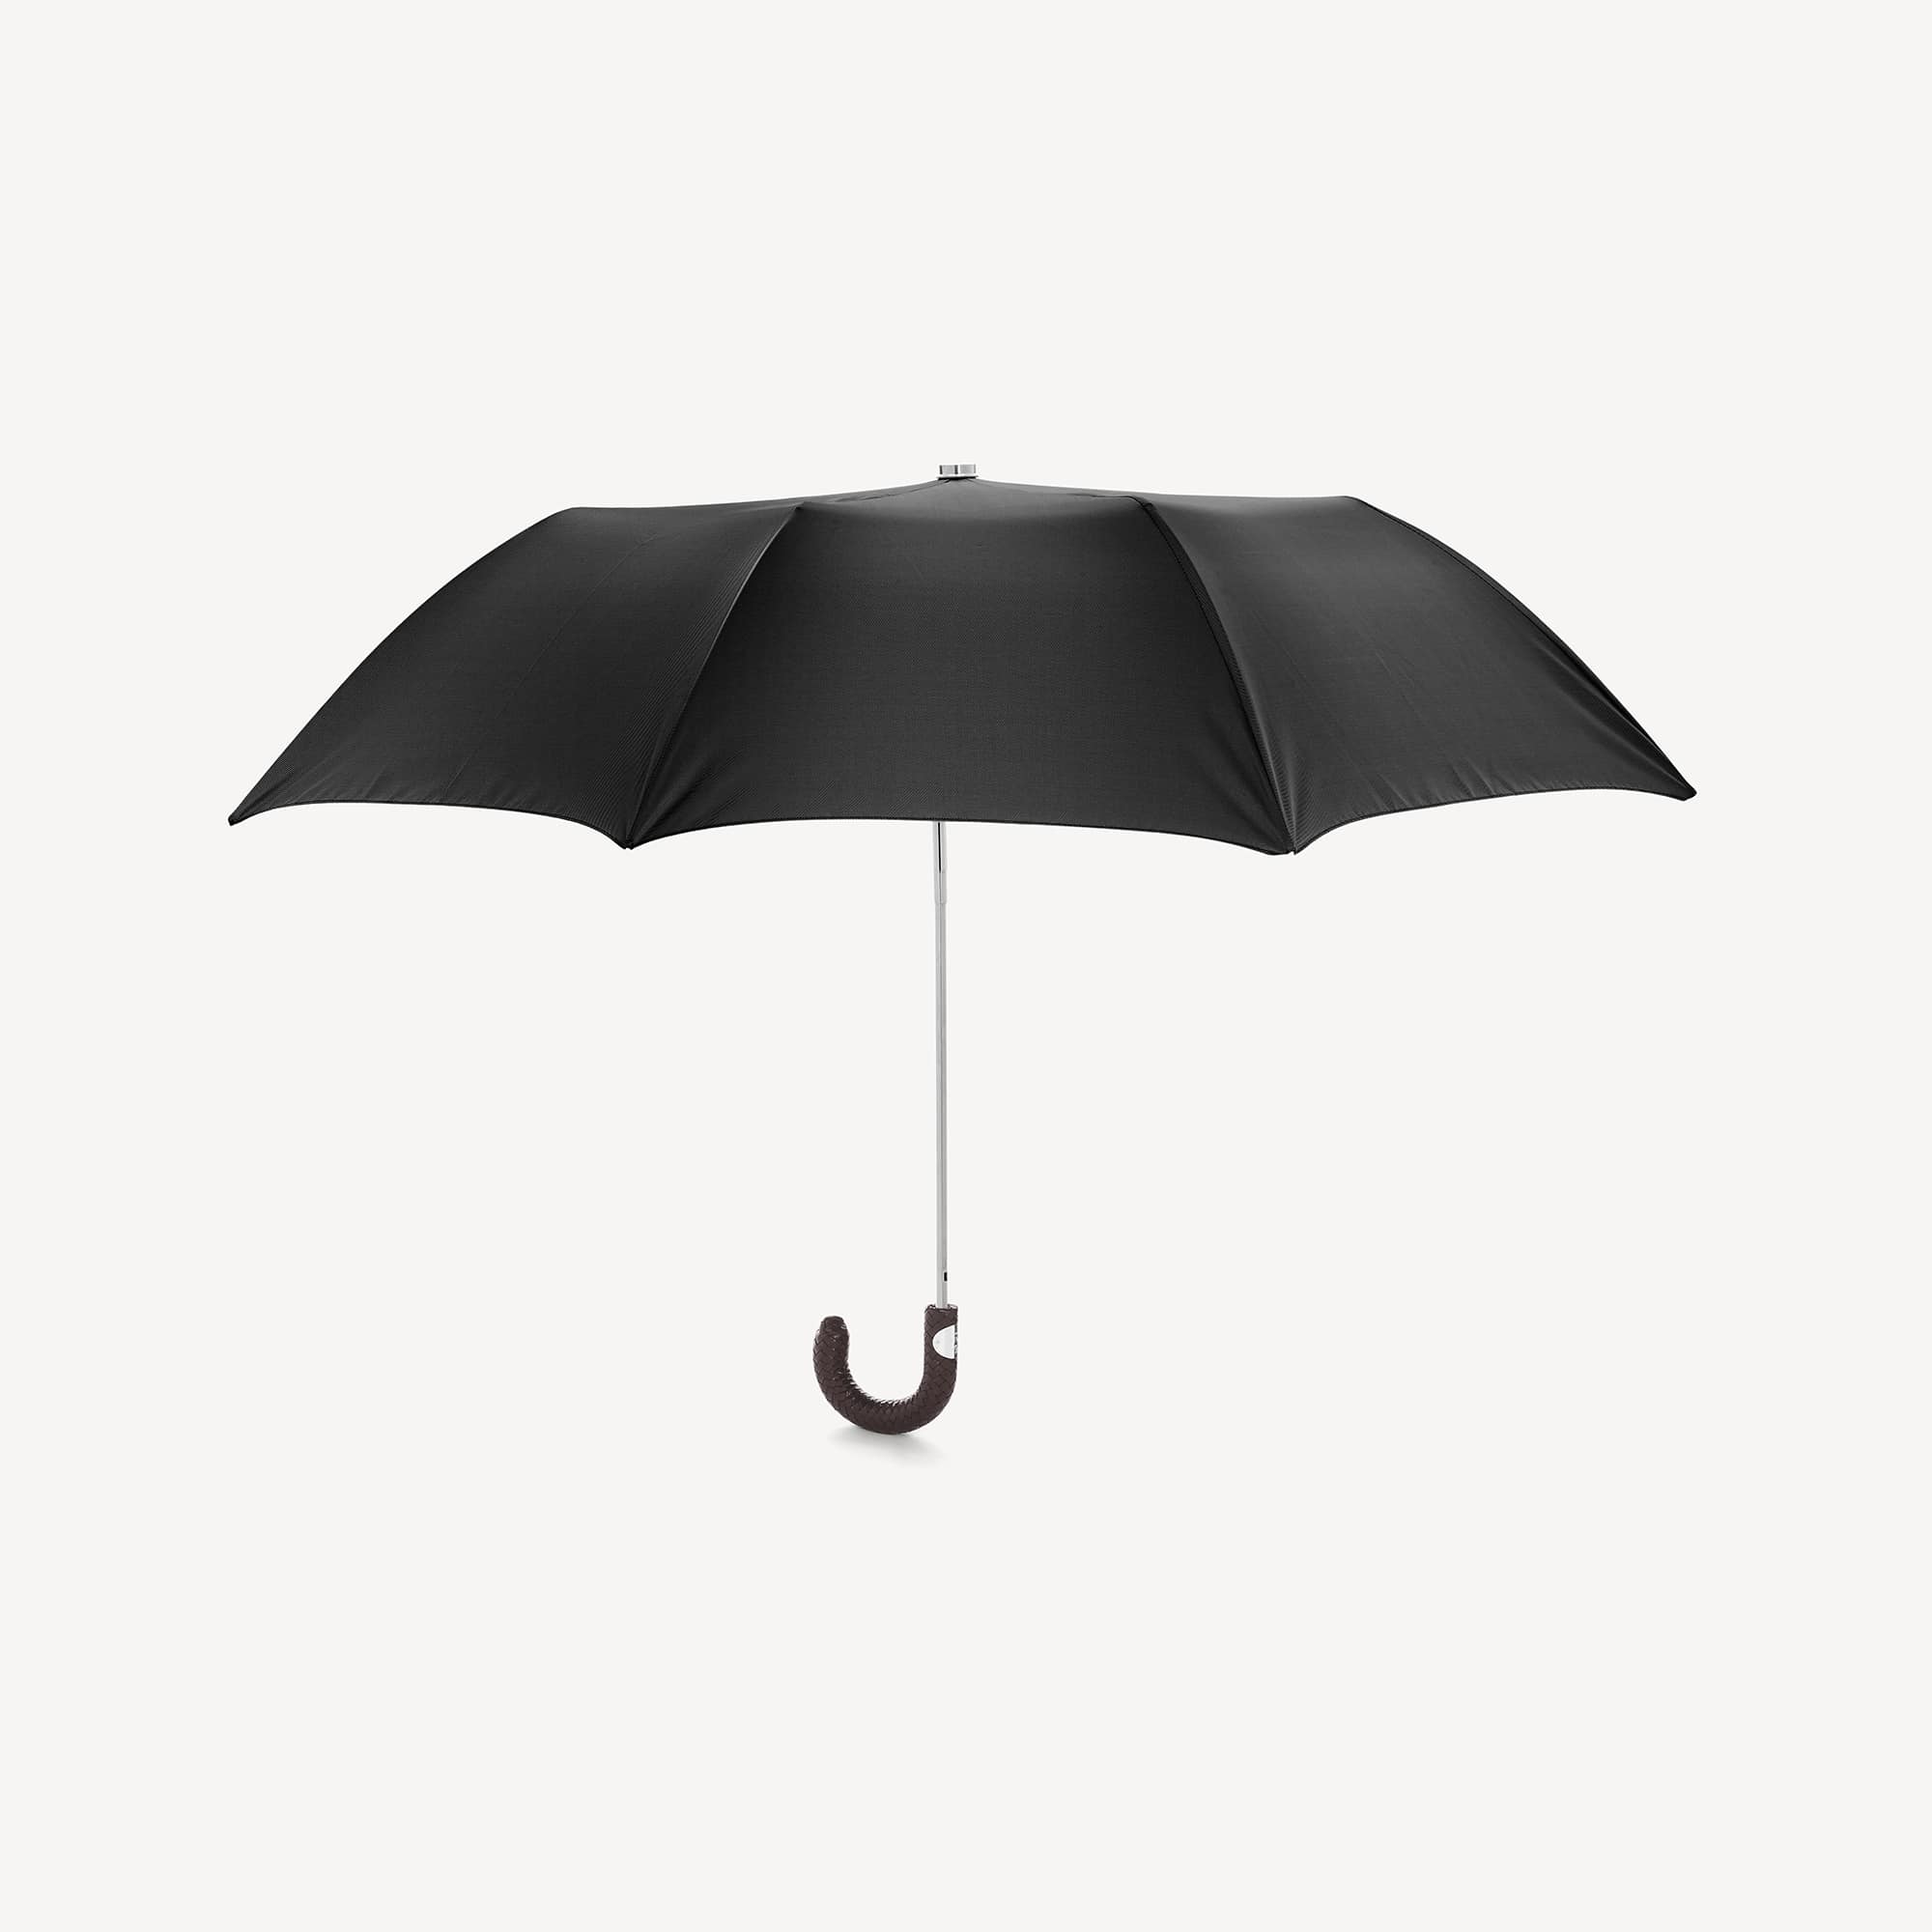 Collapsible Umbrella with Braided Leather Handle - Black - Swaine